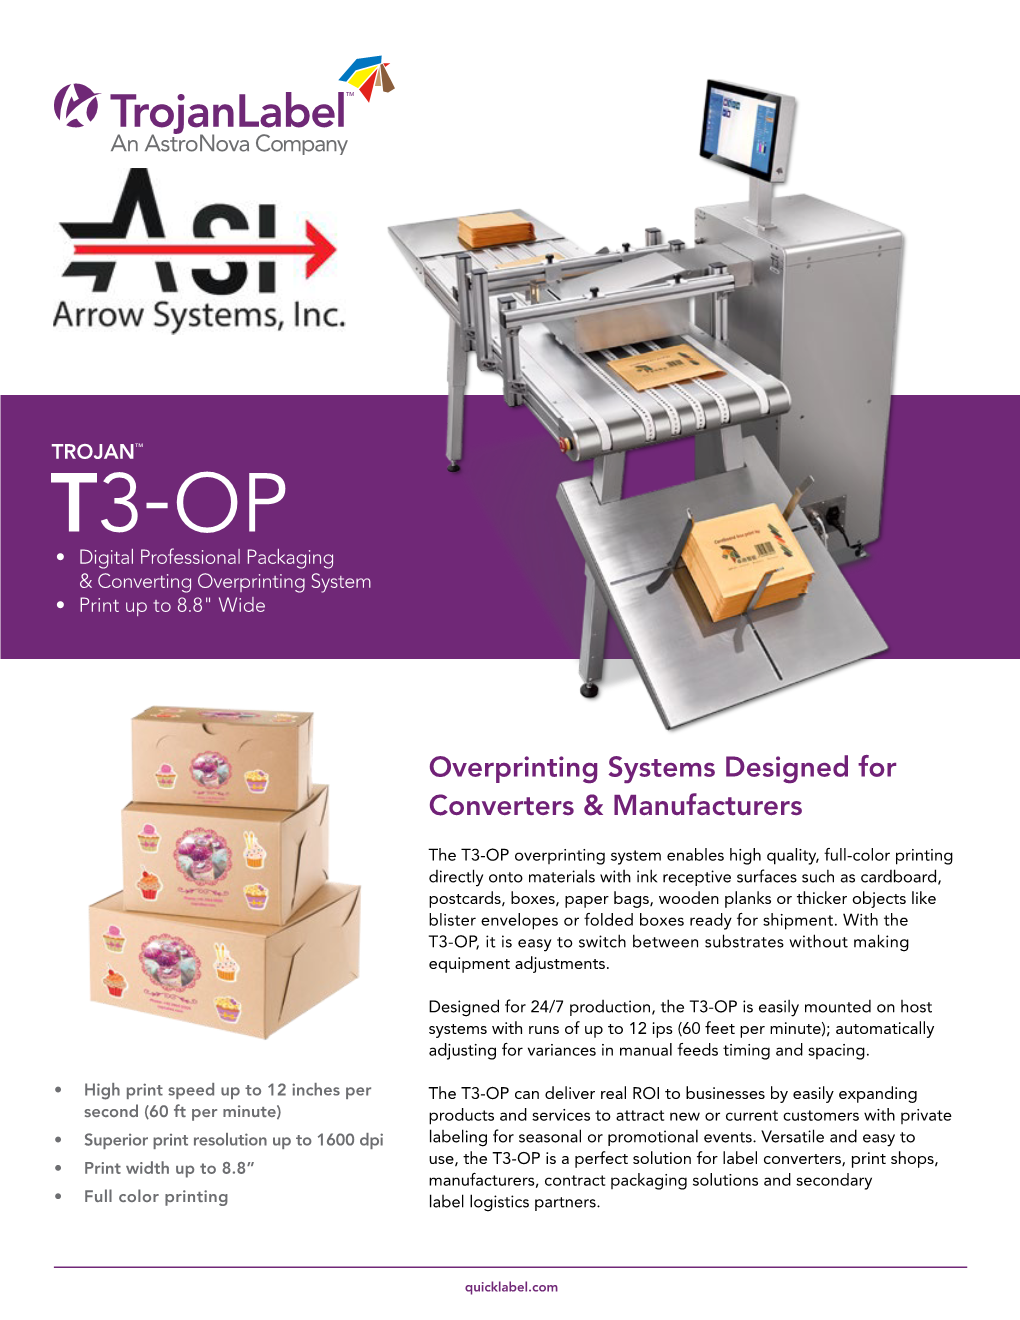 Overprinting Systems Designed for Converters & Manufacturers